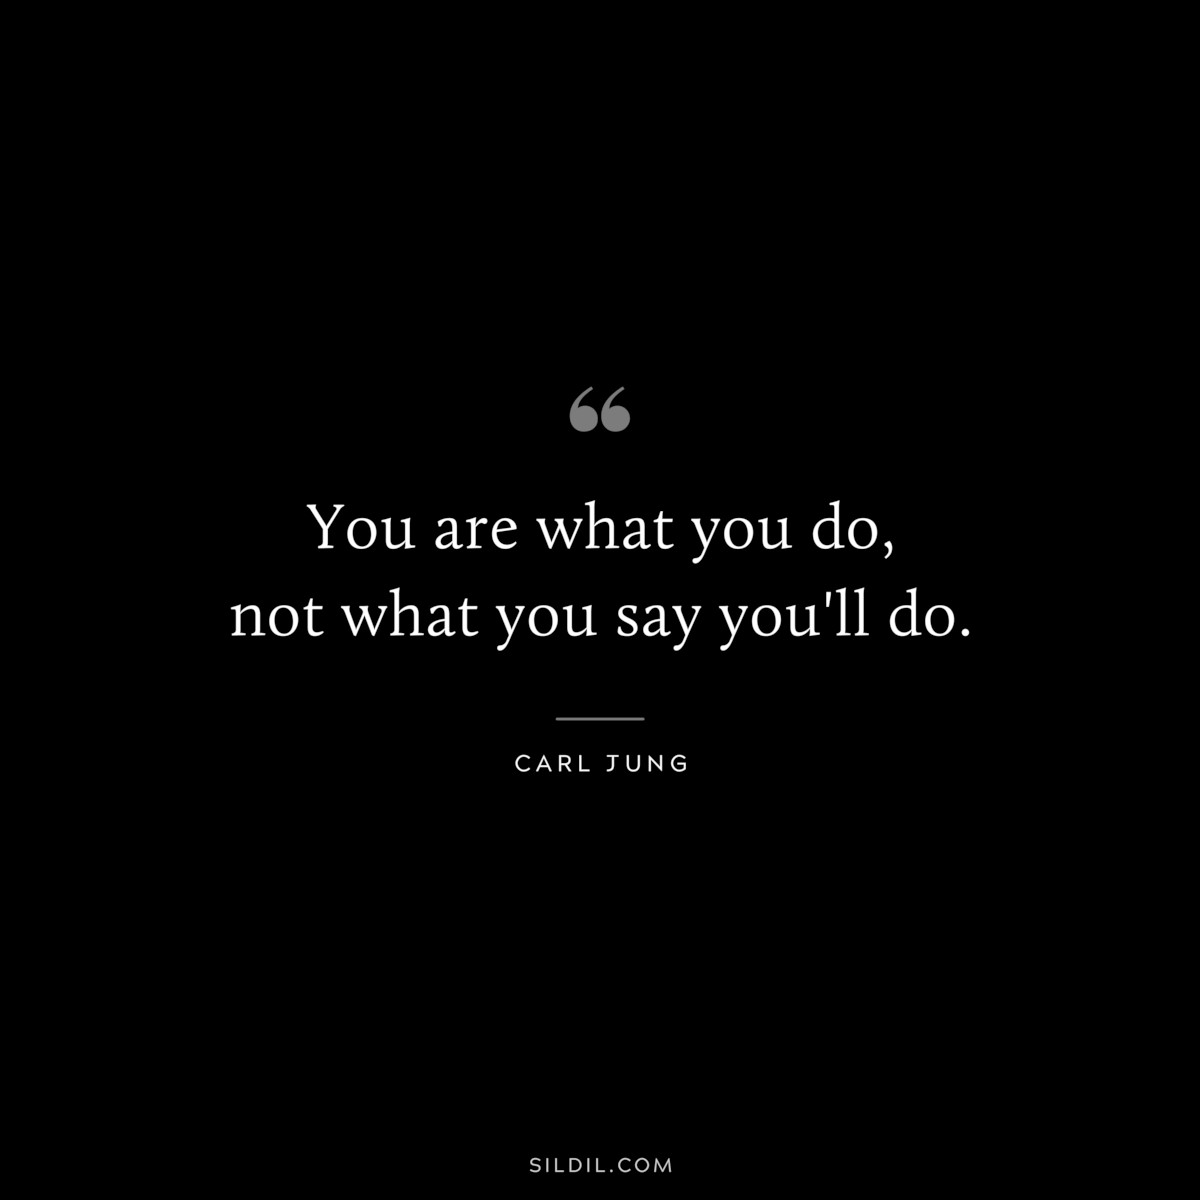 You are what you do, not what you say you'll do. ― Carl Jung